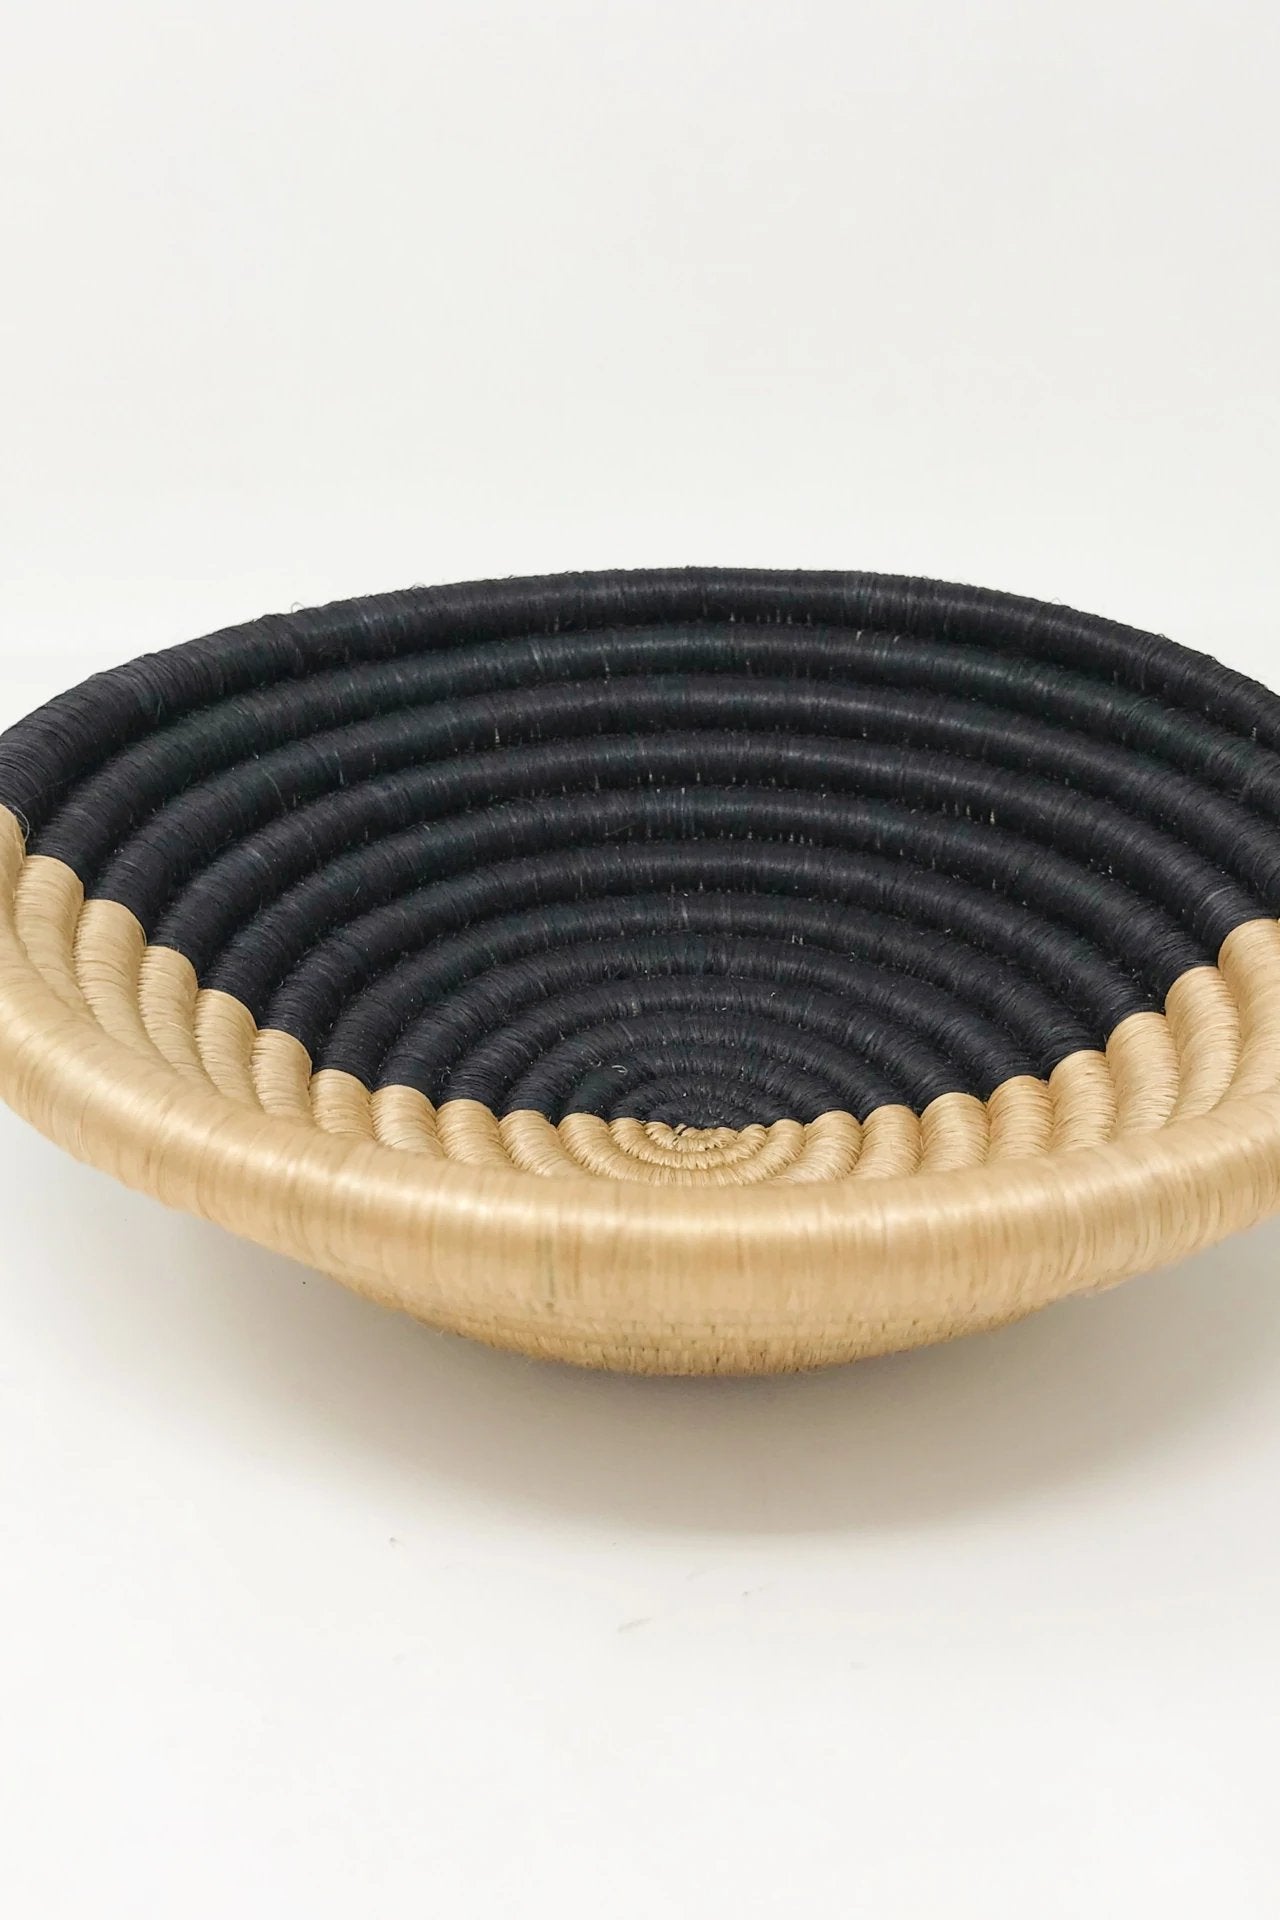 Great Divide Woven Bowls